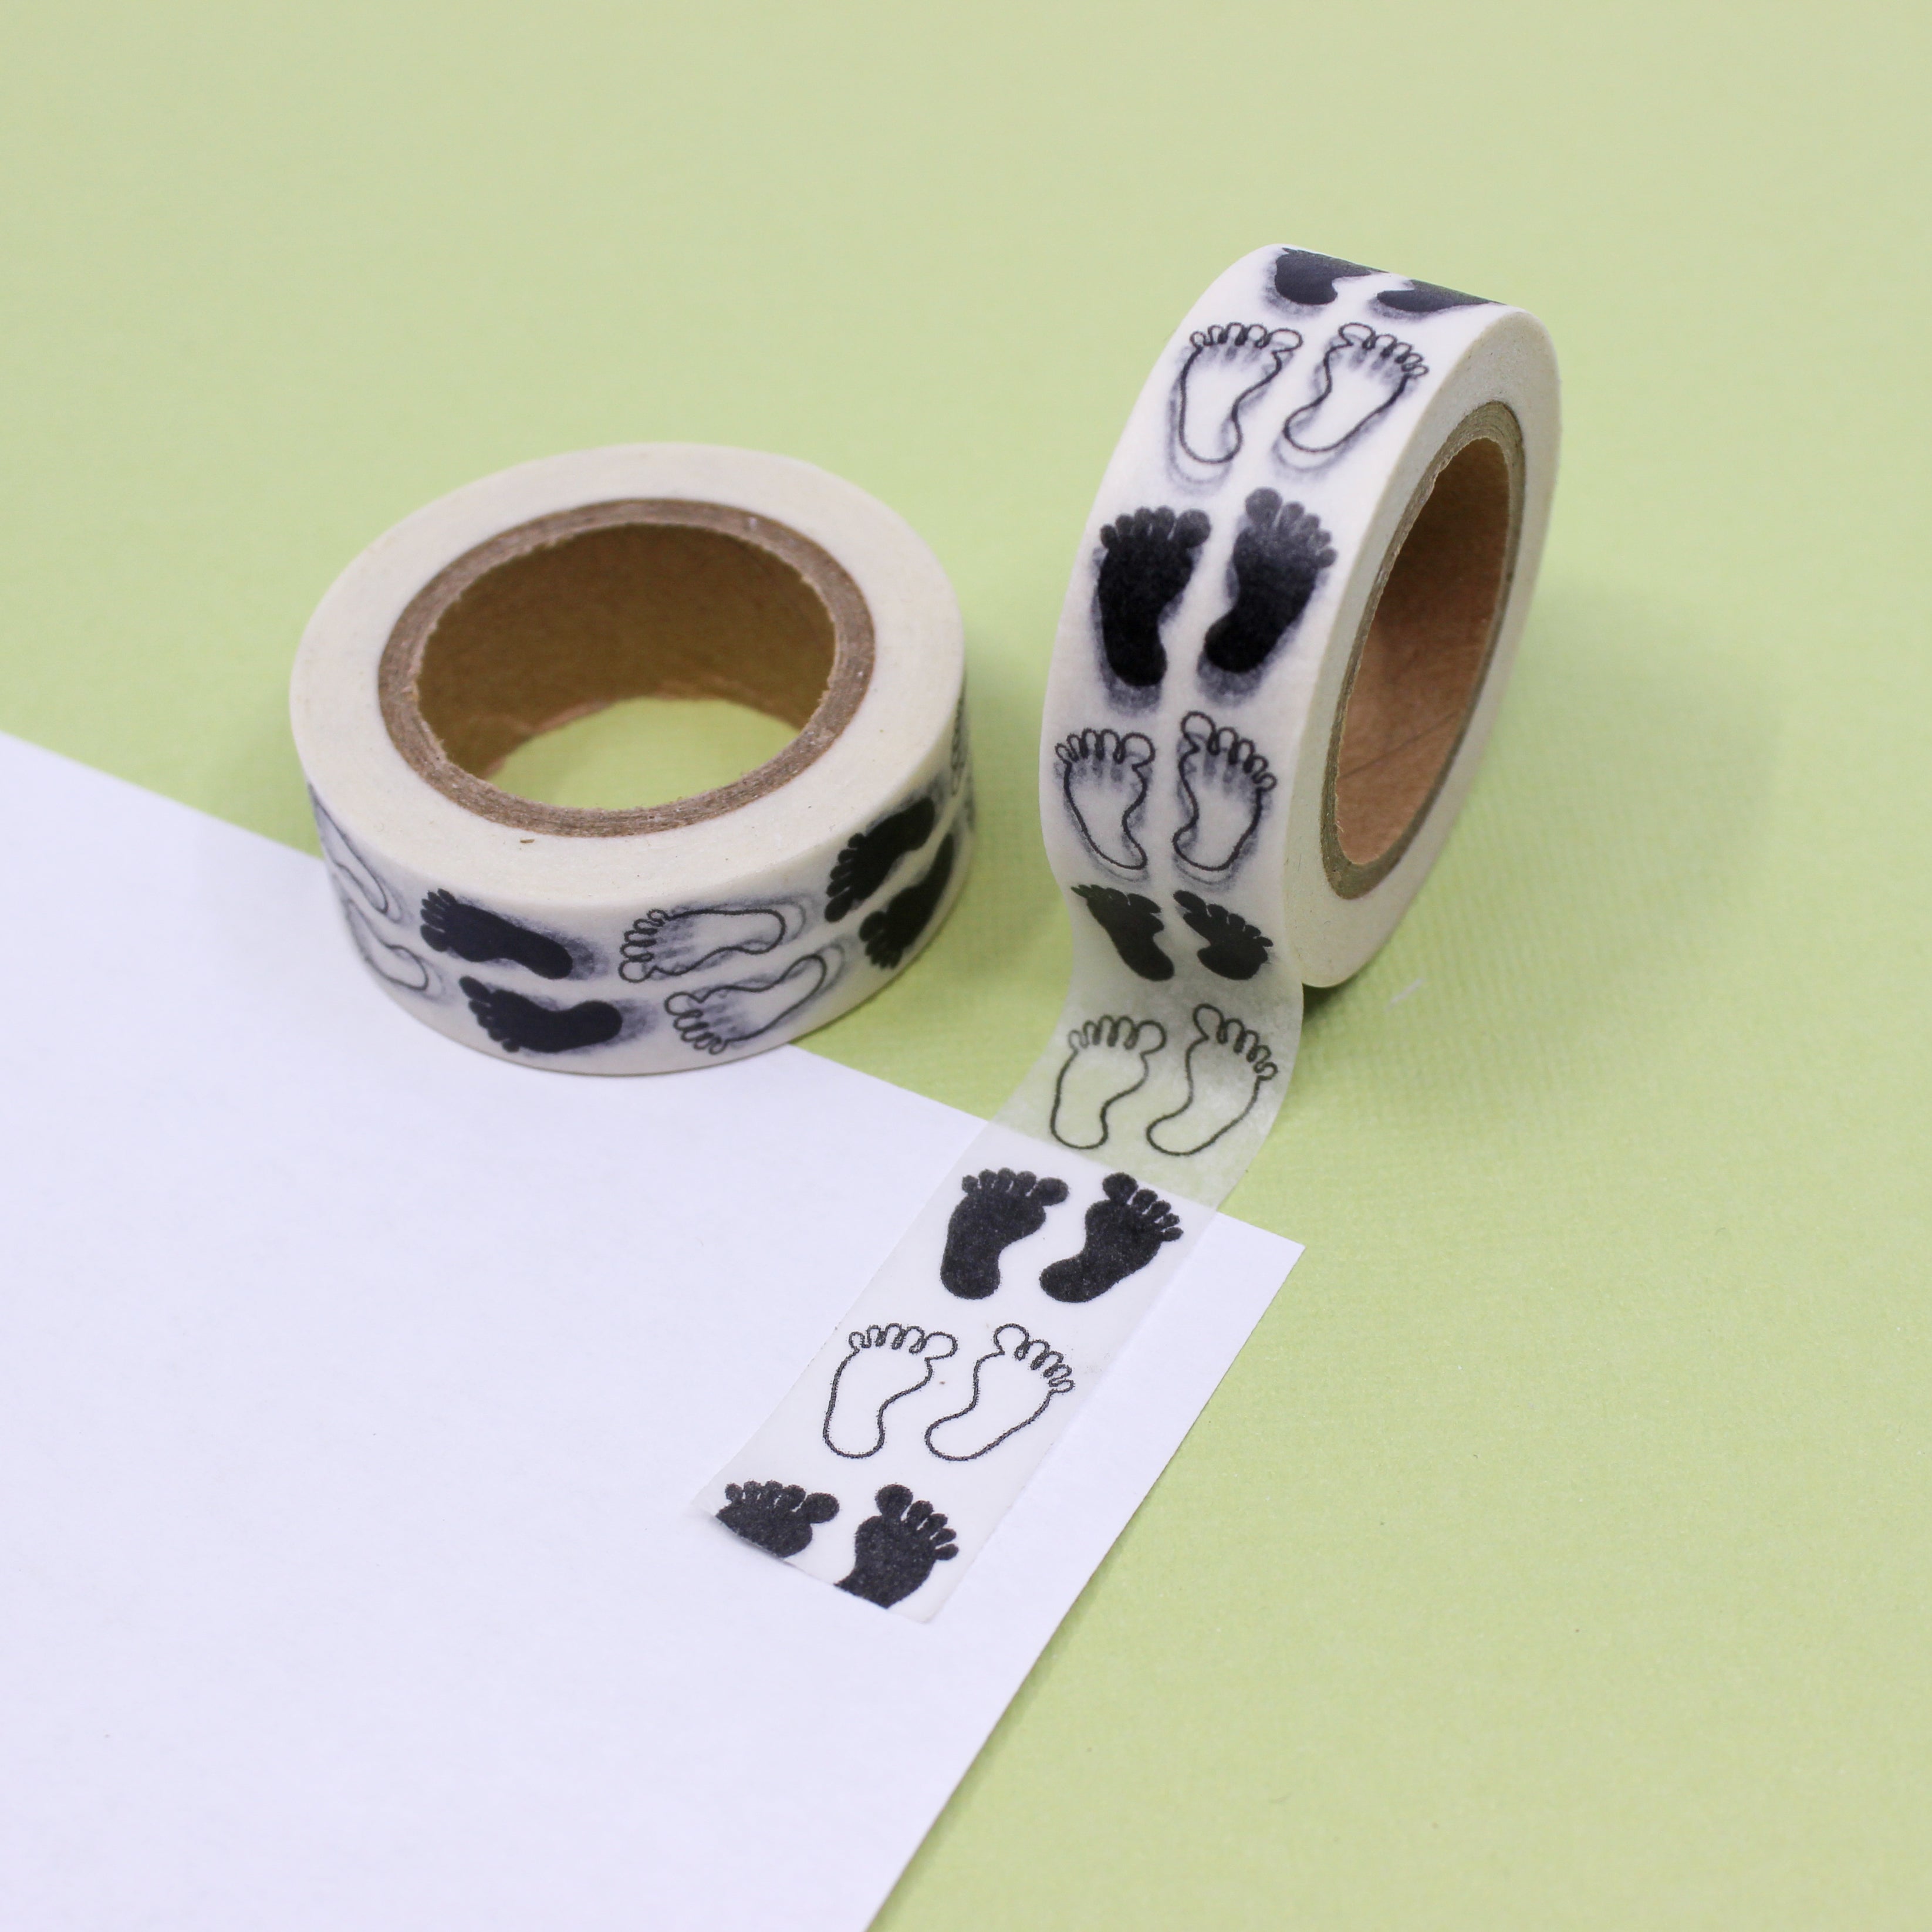 This is a black and white foot prints view themed washi tape from BBB Supplies Craft Shop